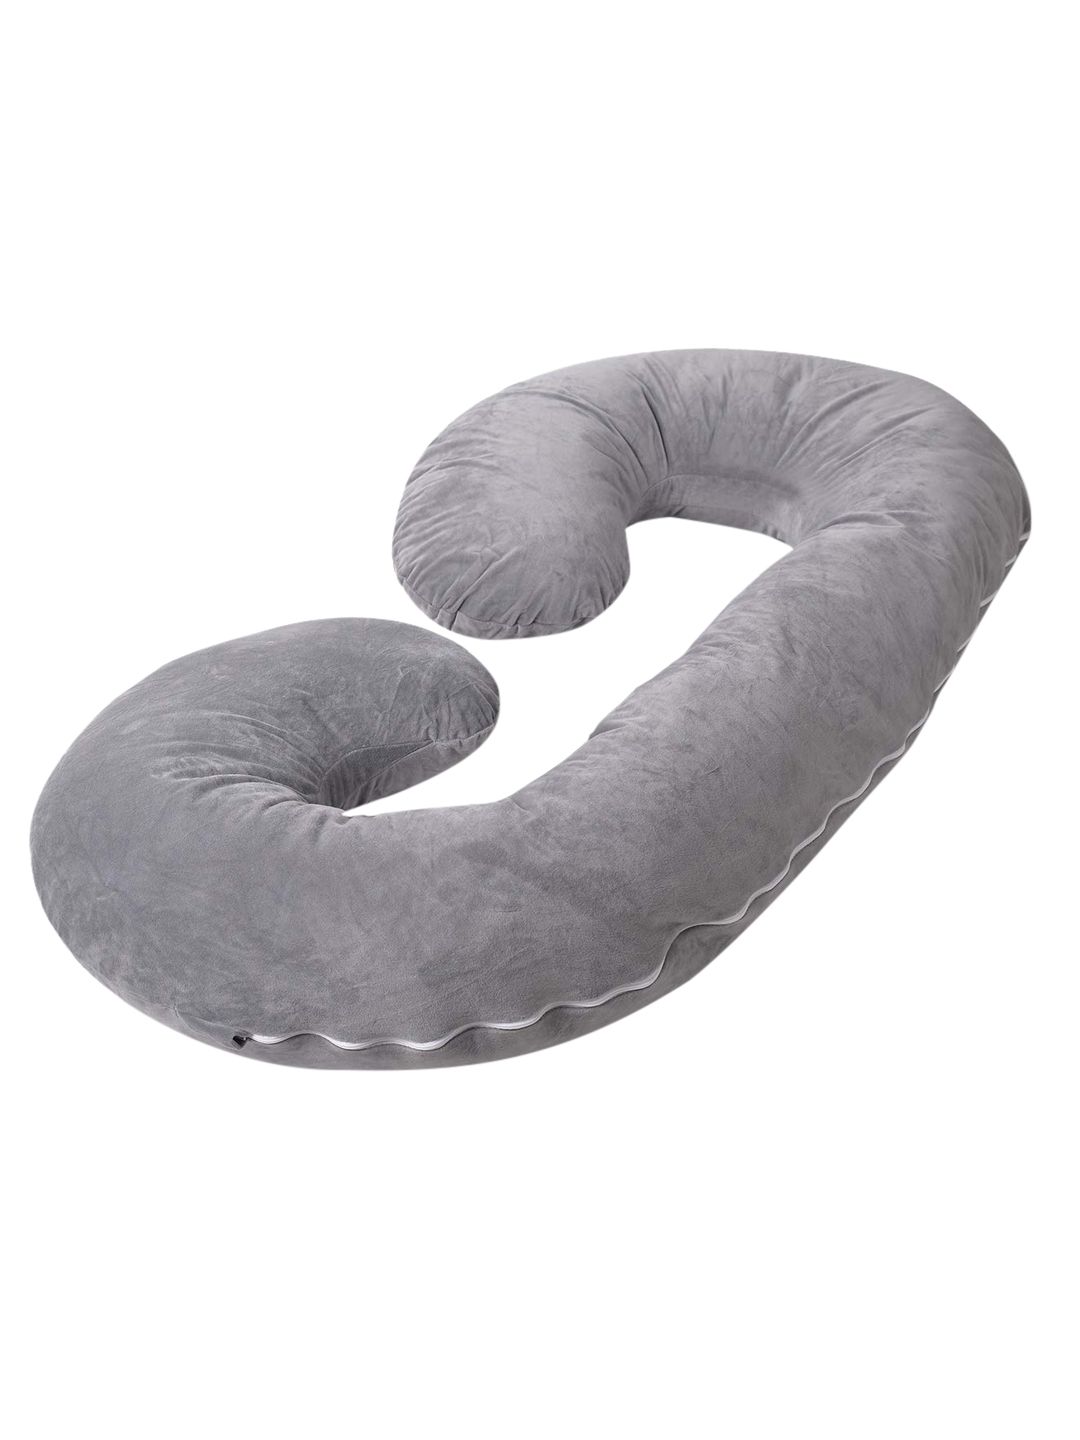 Kuber Industries Grey Cotton Ultra Soft Hollow Fibre C Shaped Maternity Pillow with Zippered Cover Price in India